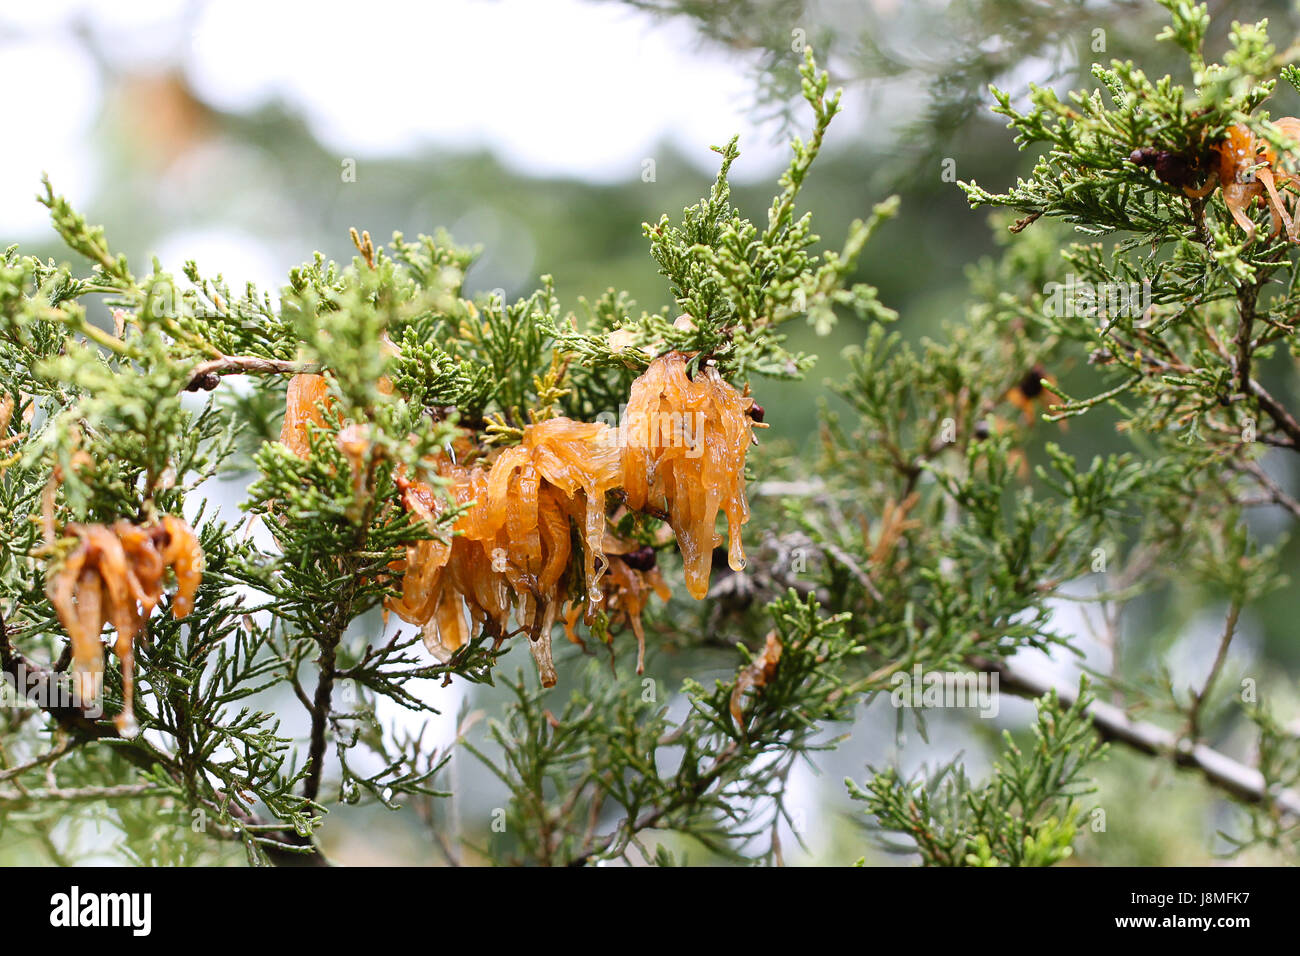 An alien invasion? Mature Cedar Apple Rust displays gelatinous orange tendrils after a rainstorm in spring. Spores harmful to any nearby apple trees. Stock Photo